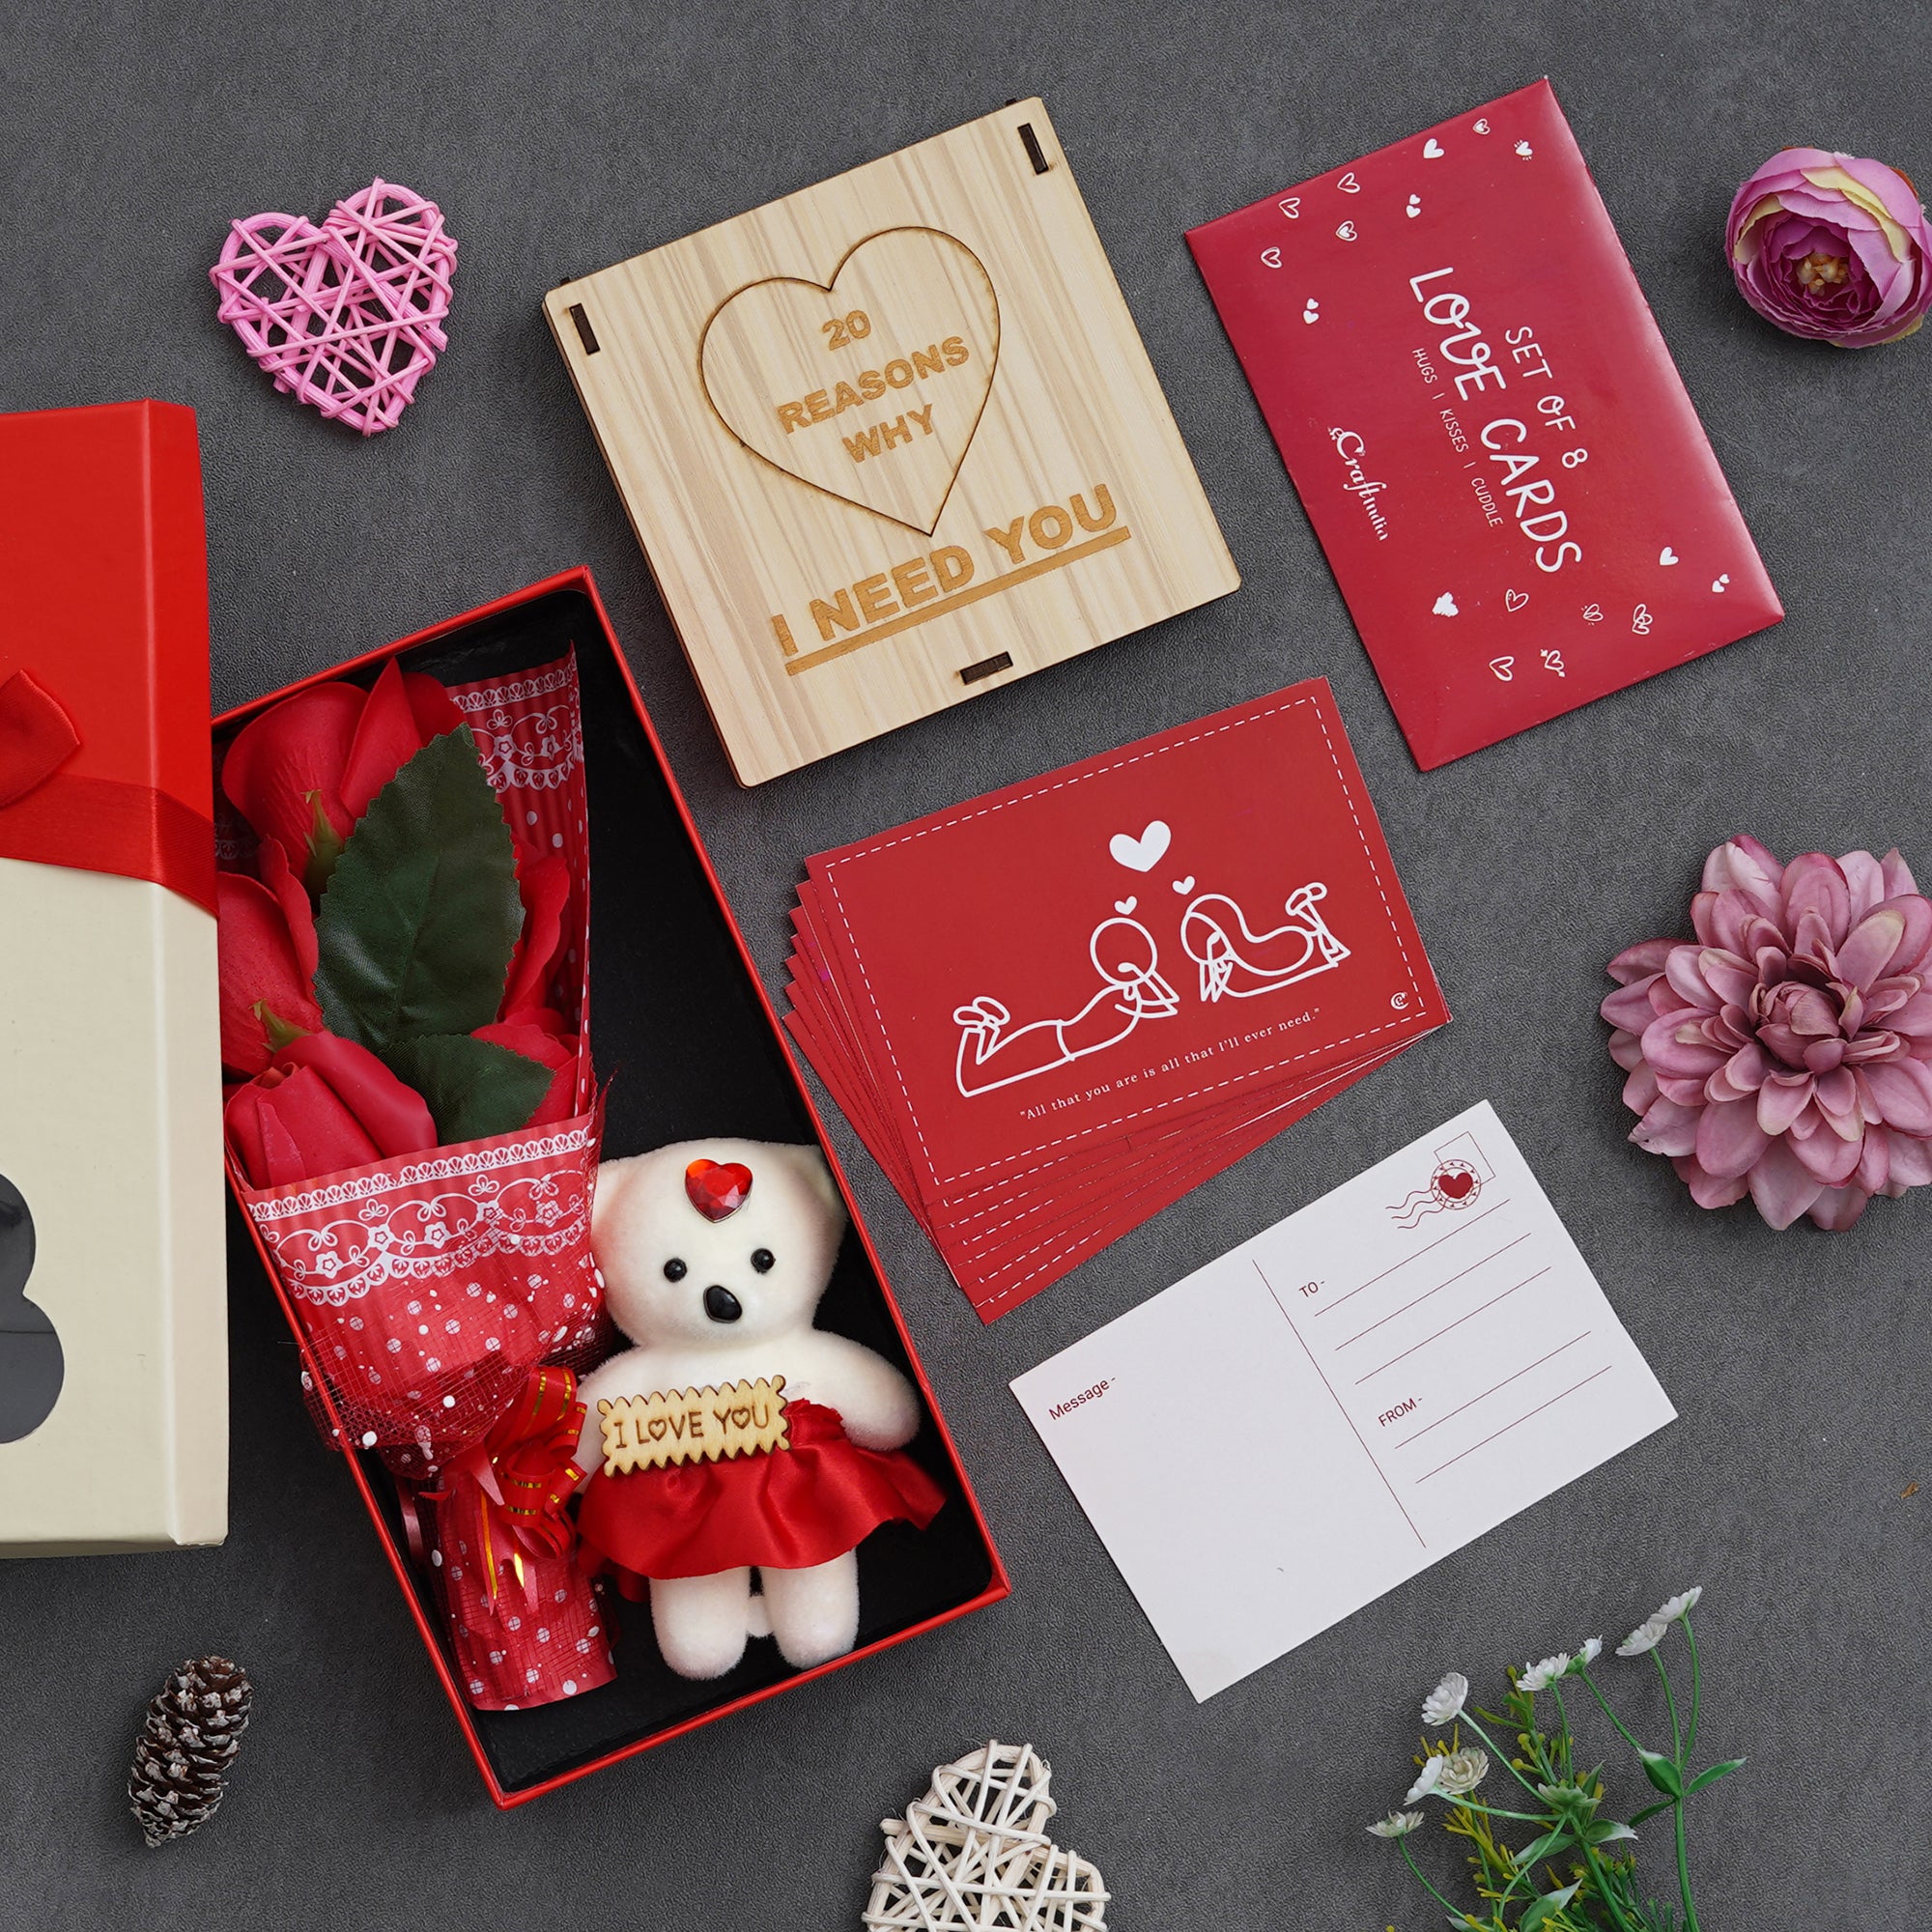 Valentine Combo of Pack of 8 Love Gift Cards, "20 Reasons Why I Need You" Printed on Little Hearts Wooden Gift Set, Red Roses Bouquet and White, Red Teddy Bear Valentine's Rectangle Shaped Gift Box